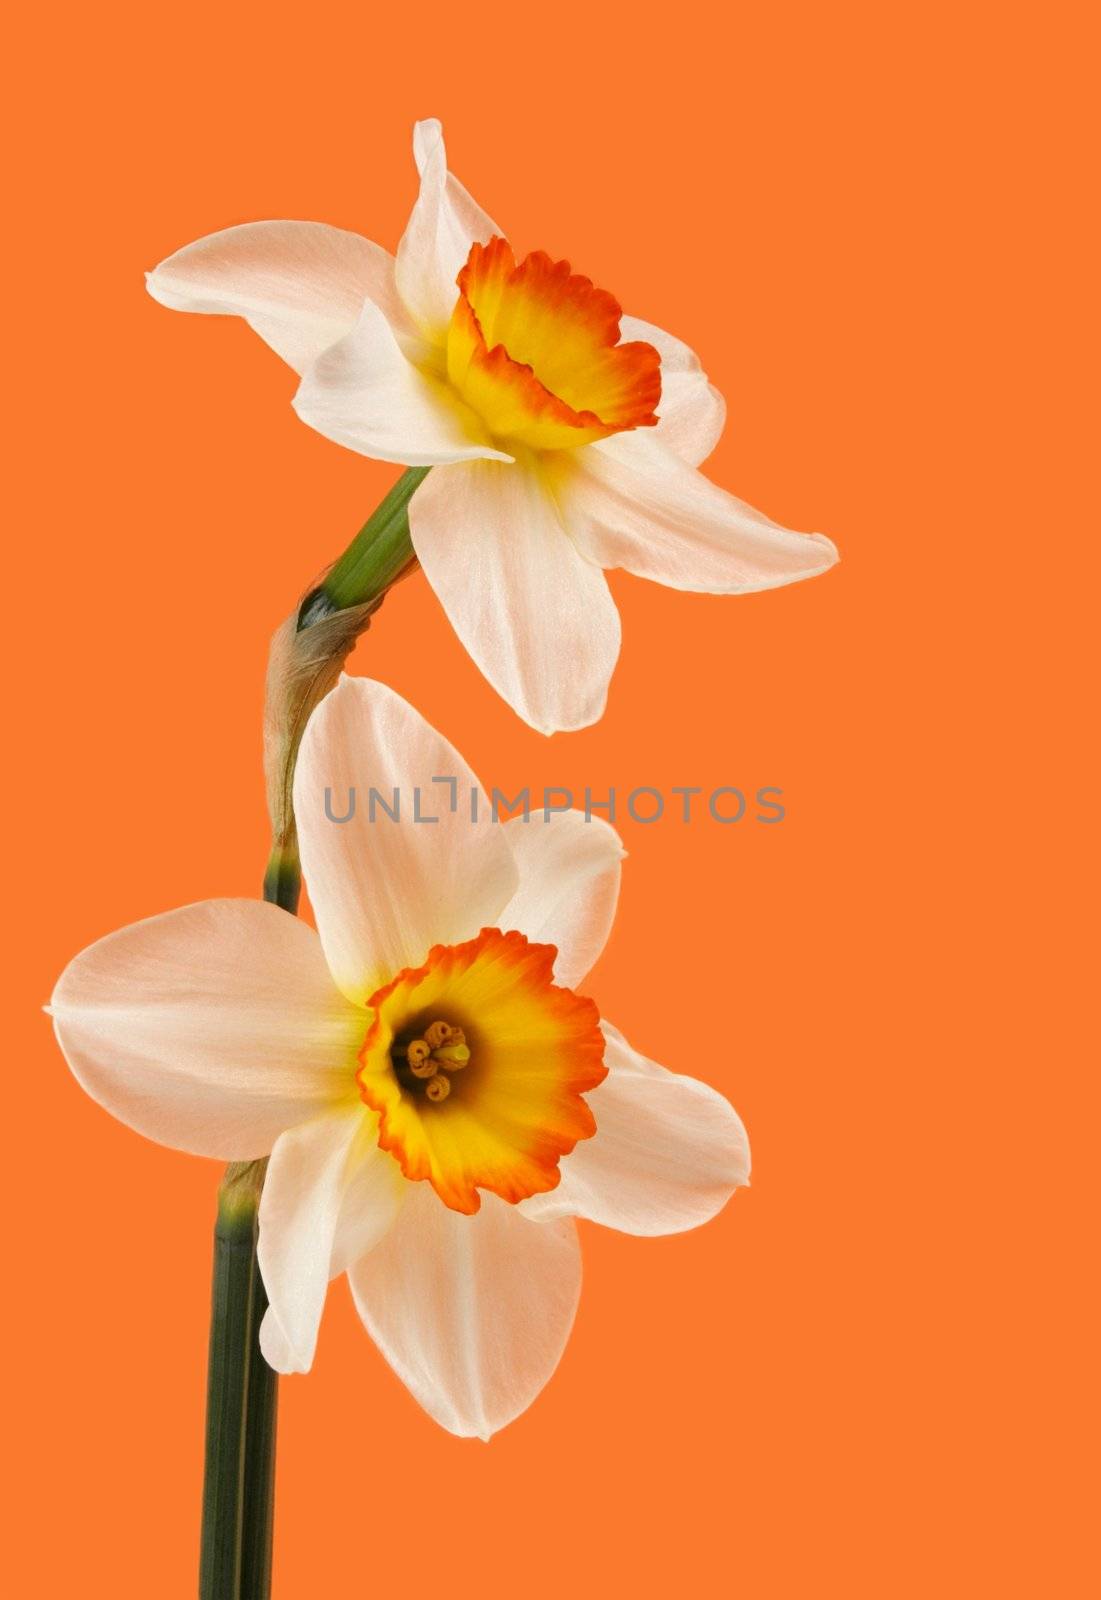 jonquil flower by lanalanglois